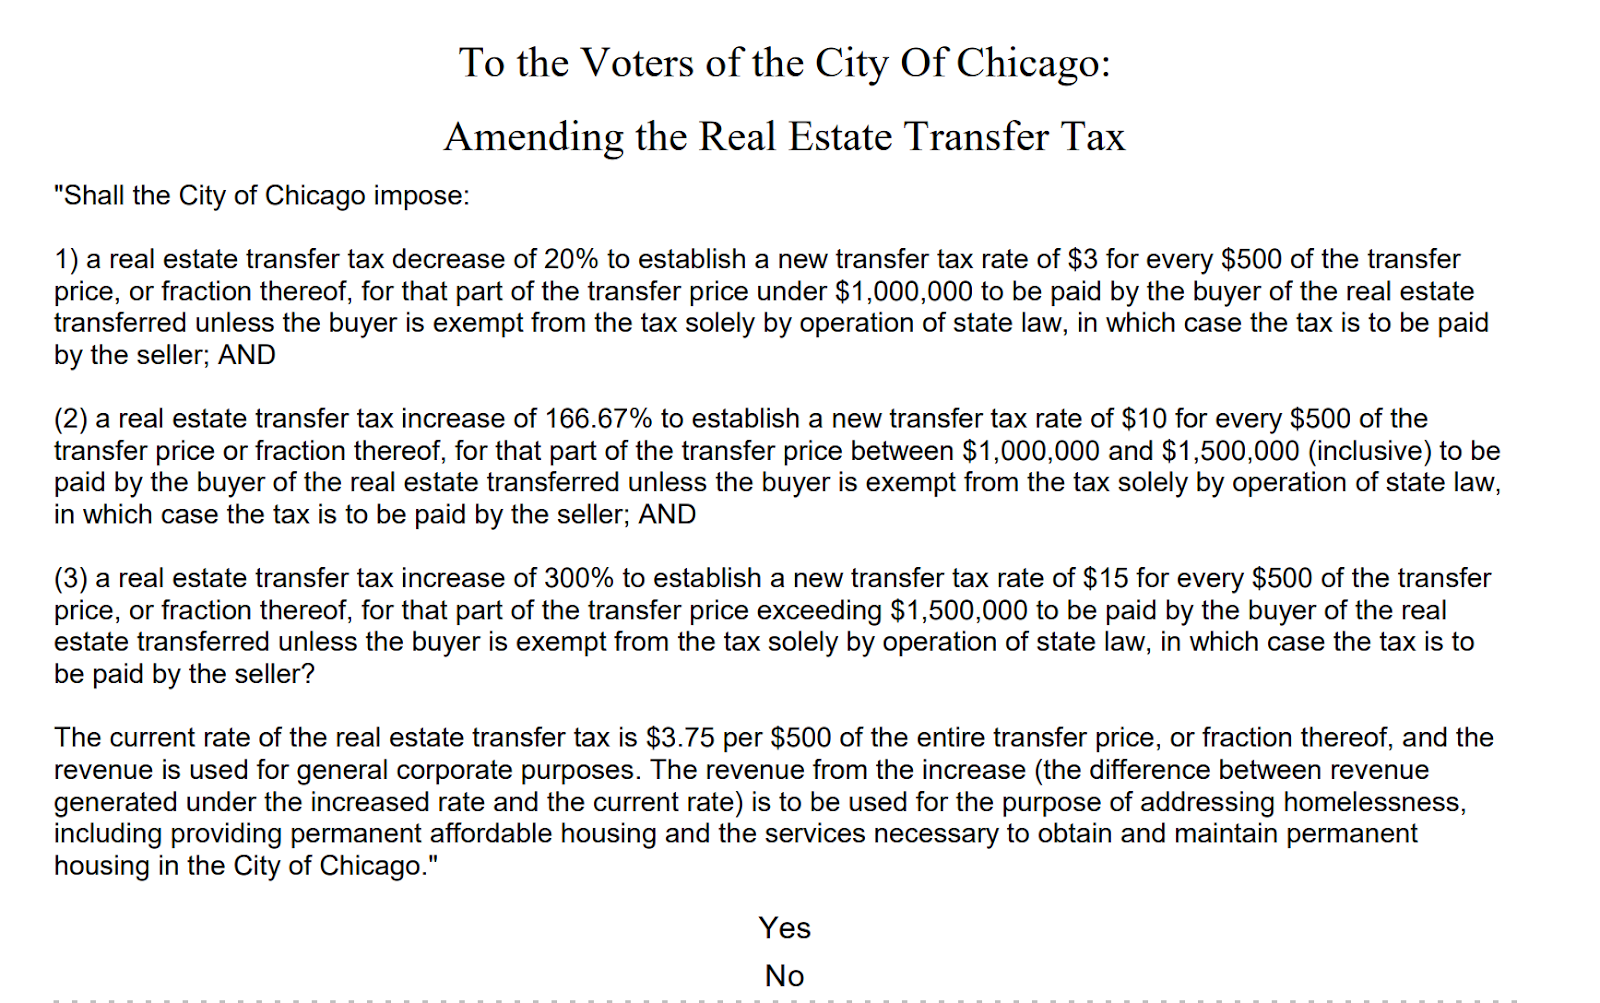 "Shall the City of Chicago impose:
1) a real estate transfer tax decrease of 20% to establish a new transfer tax rate of $3 for every $500 of the transfer
price, or fraction thereof, for that part of the transfer price under $1,000,000 to be paid by the buyer of the real estate
transferred unless the buyer is exempt from the tax solely by operation of state law, in which case the tax is to be paid
by the seller; AND
(2) a real estate transfer tax increase of 166.67% to establish a new transfer tax rate of $10 for every $500 of the
transfer price or fraction thereof, for that part of the transfer price between $1,000,000 and $1,500,000 (inclusive) to be
paid by the buyer of the real estate transferred unless the buyer is exempt from the tax solely by operation of state law,
in which case the tax is to be paid by the seller; AND
(3) a real estate transfer tax increase of 300% to establish a new transfer tax rate of $15 for every $500 of the transfer
price, or fraction thereof, for that part of the transfer price exceeding $1,500,000 to be paid by the buyer of the real
estate transferred unless the buyer is exempt from the tax solely by operation of state law, in which case the tax is to
be paid by the seller?
The current rate of the real estate transfer tax is $3.75 per $500 of the entire transfer price, or fraction thereof, and the
revenue is used for general corporate purposes. The revenue from the increase (the difference between revenue
generated under the increased rate and the current rate) is to be used for the purpose of addressing homelessness,
including providing permanent affordable housing and the services necessary to obtain and maintain permanent
housing in the City of Chicago.